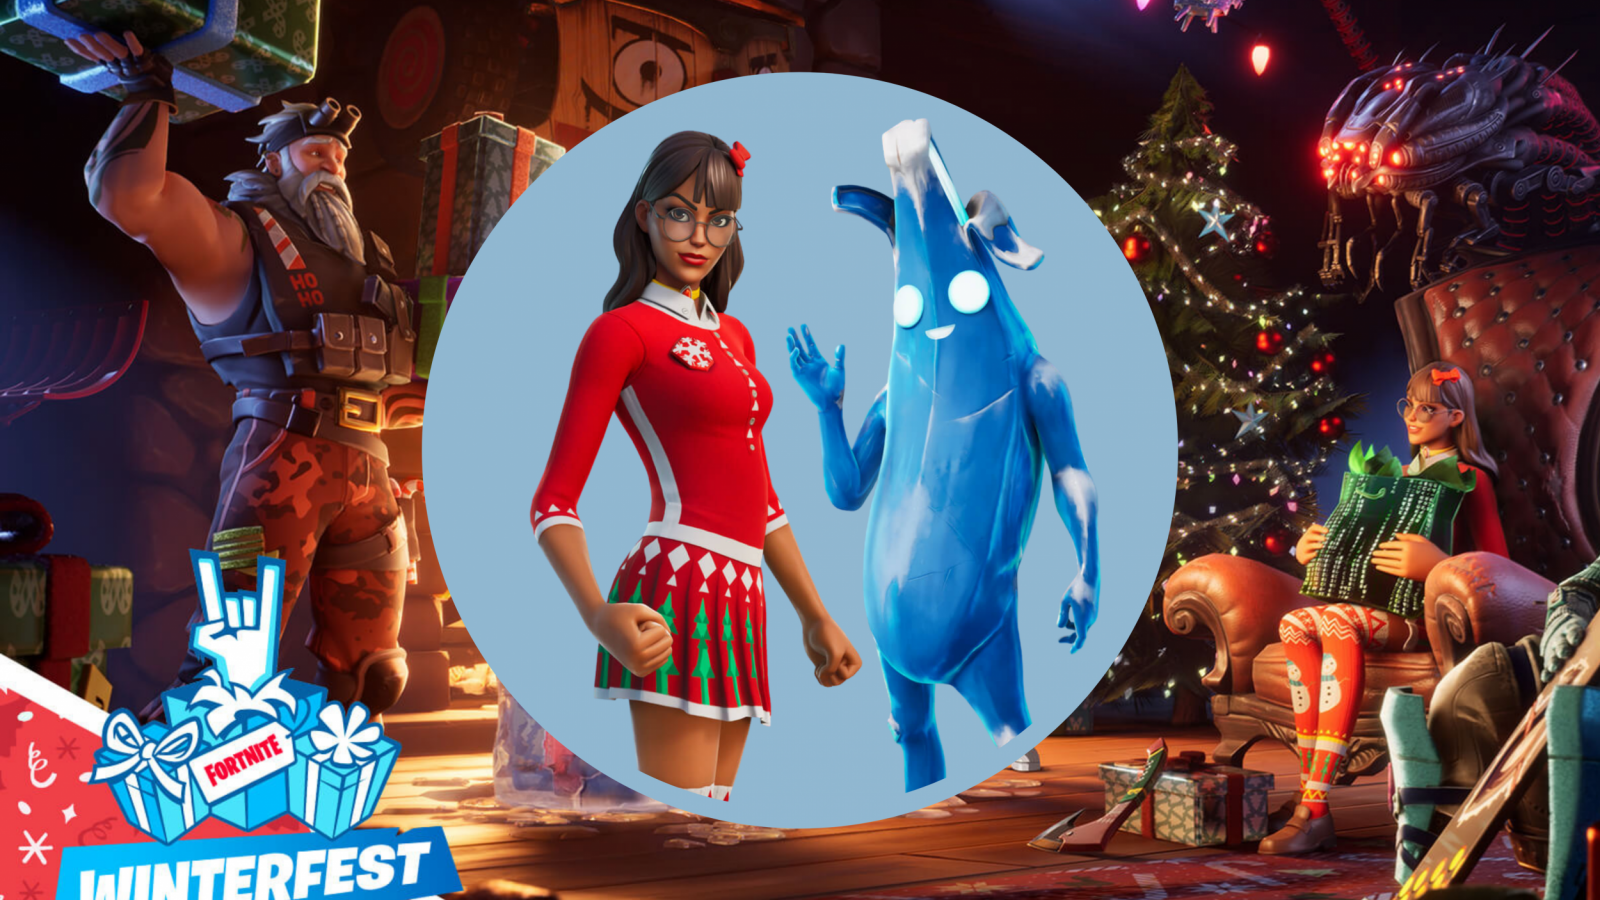 Fortnite' Winterfest 2021 Presents Guide: What's in Each Box and How To Get Last Present